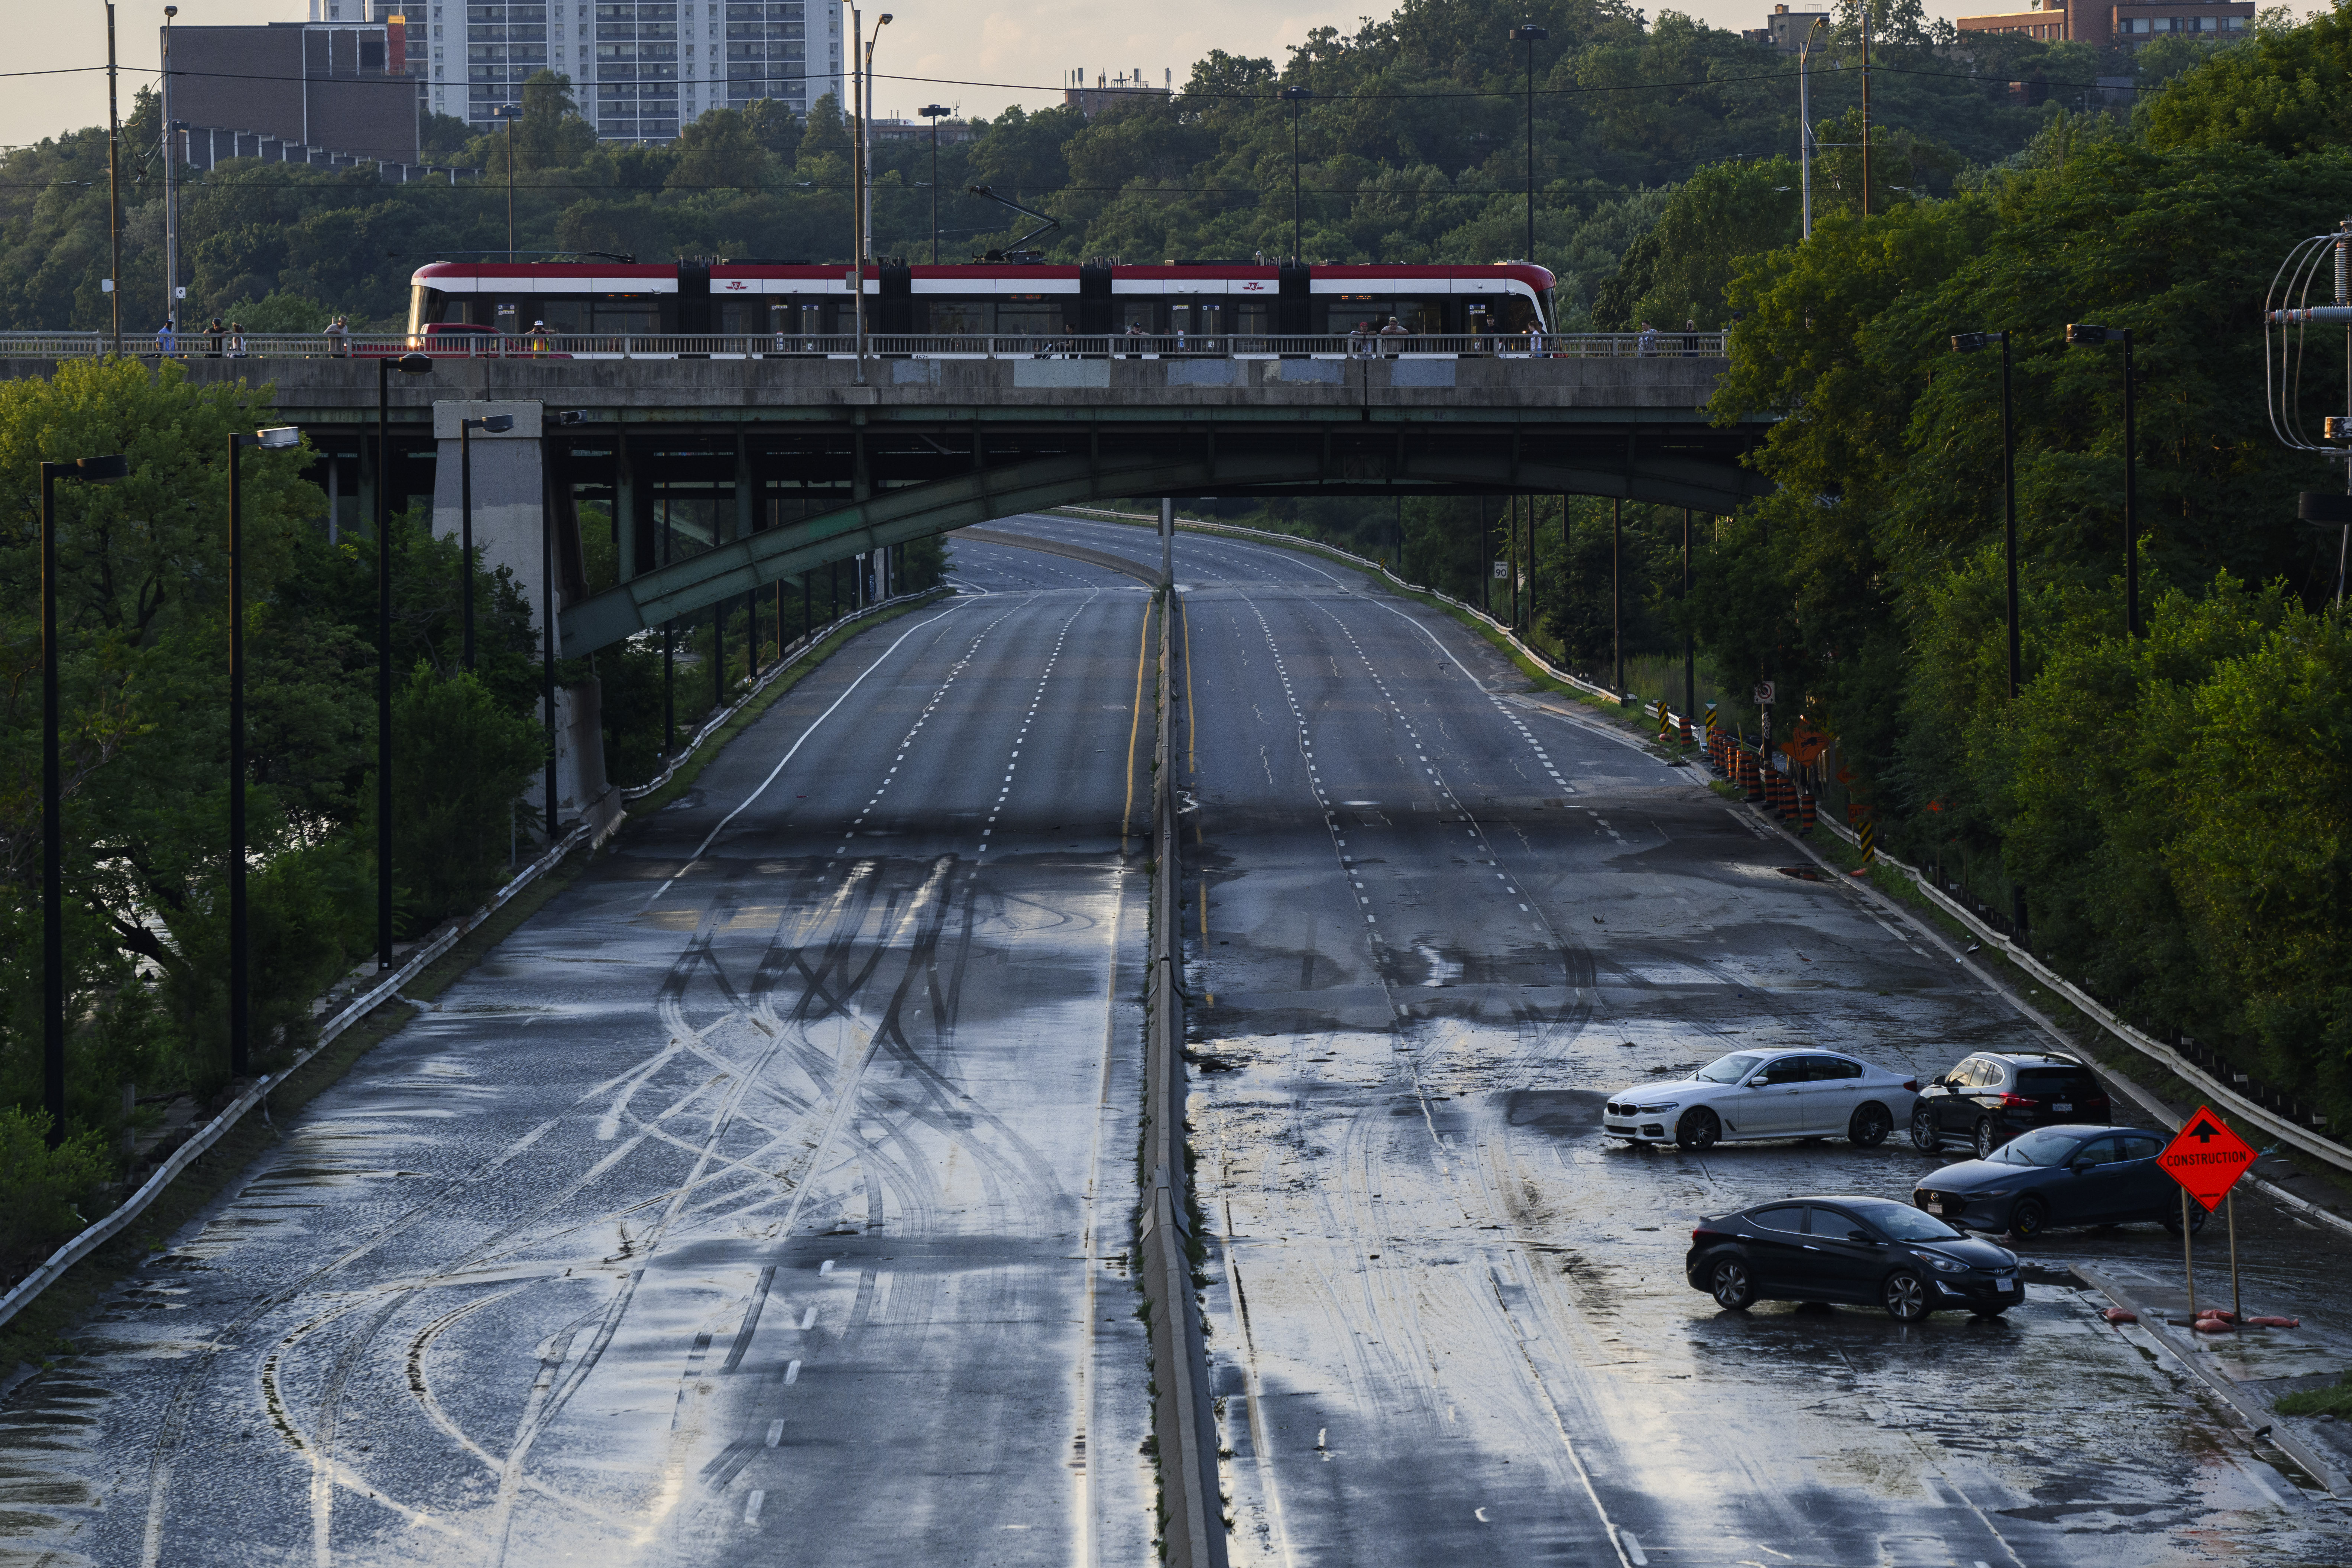 More rain in Toronto floods DVP, subway station and causes sewage bypass